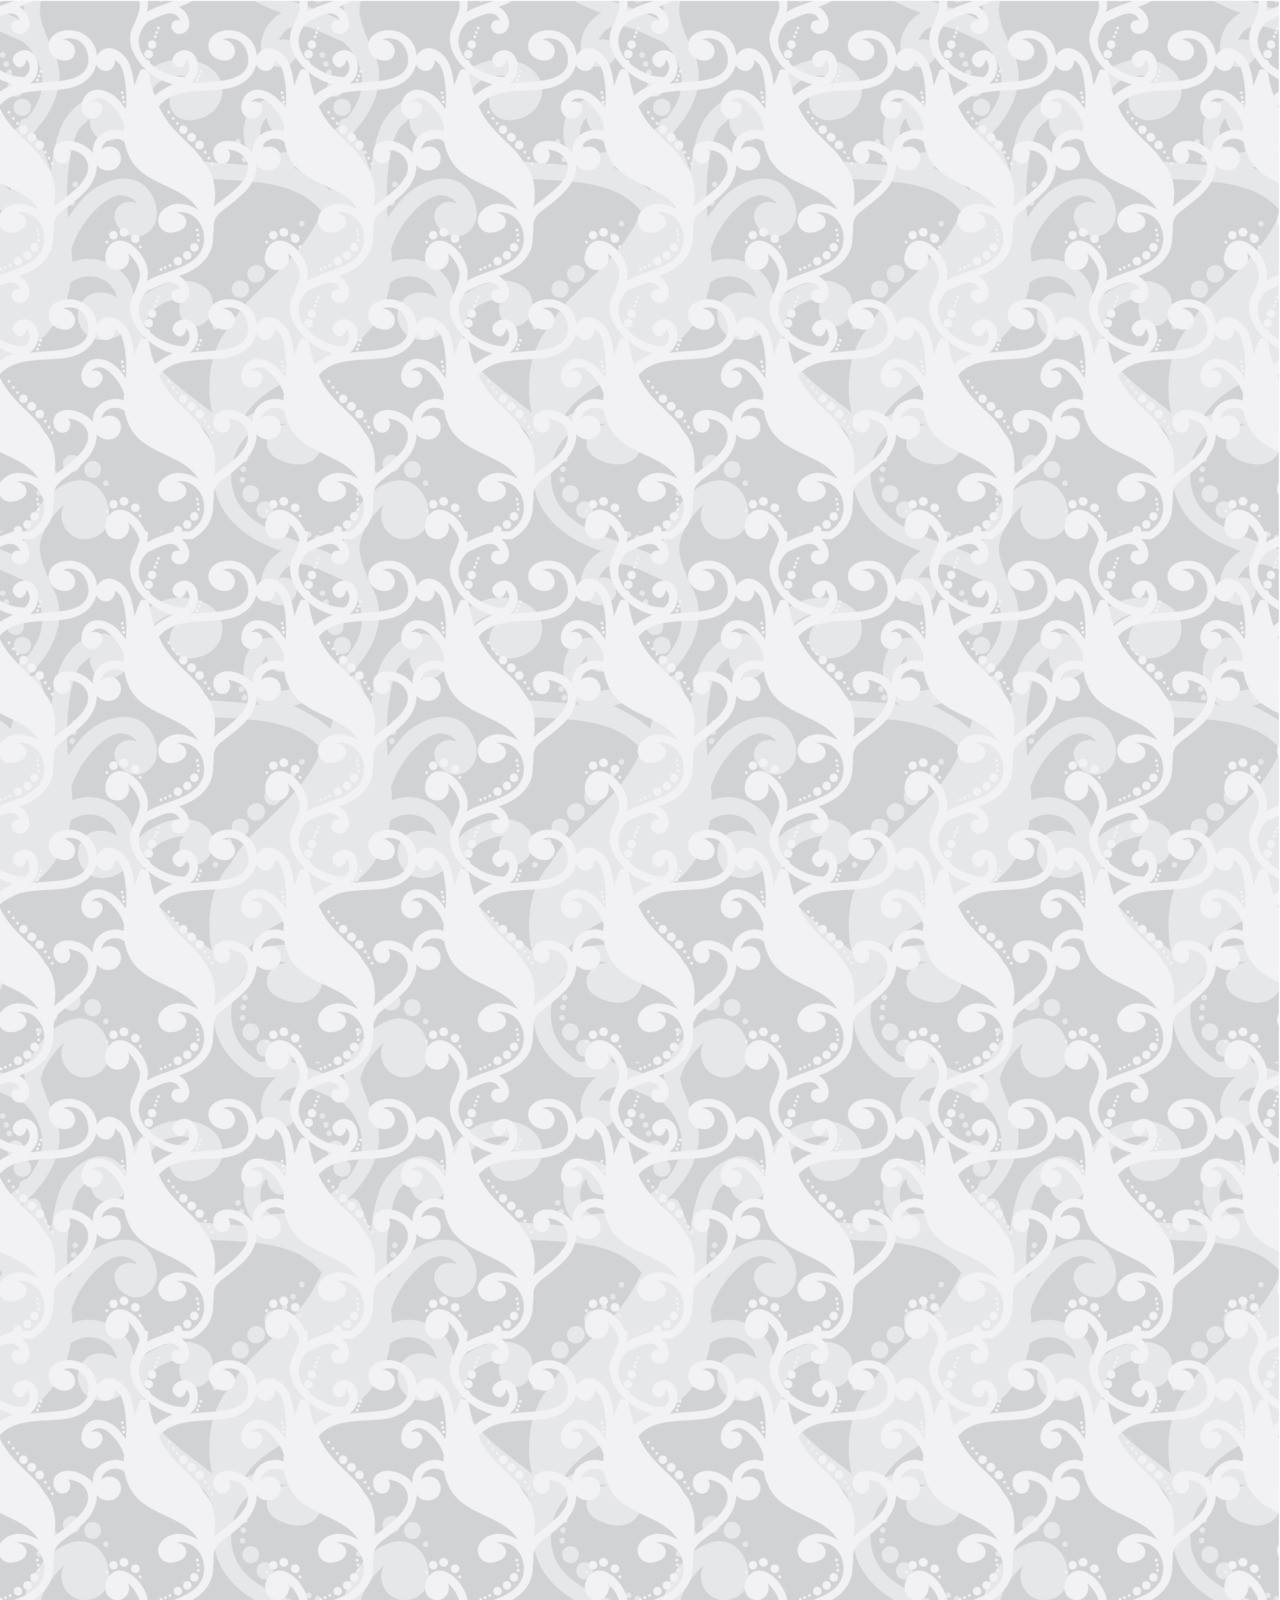 neutral floral background. swirls and curves. Use as a backdrop, the fill pattern, wallpaper, seamless texture.